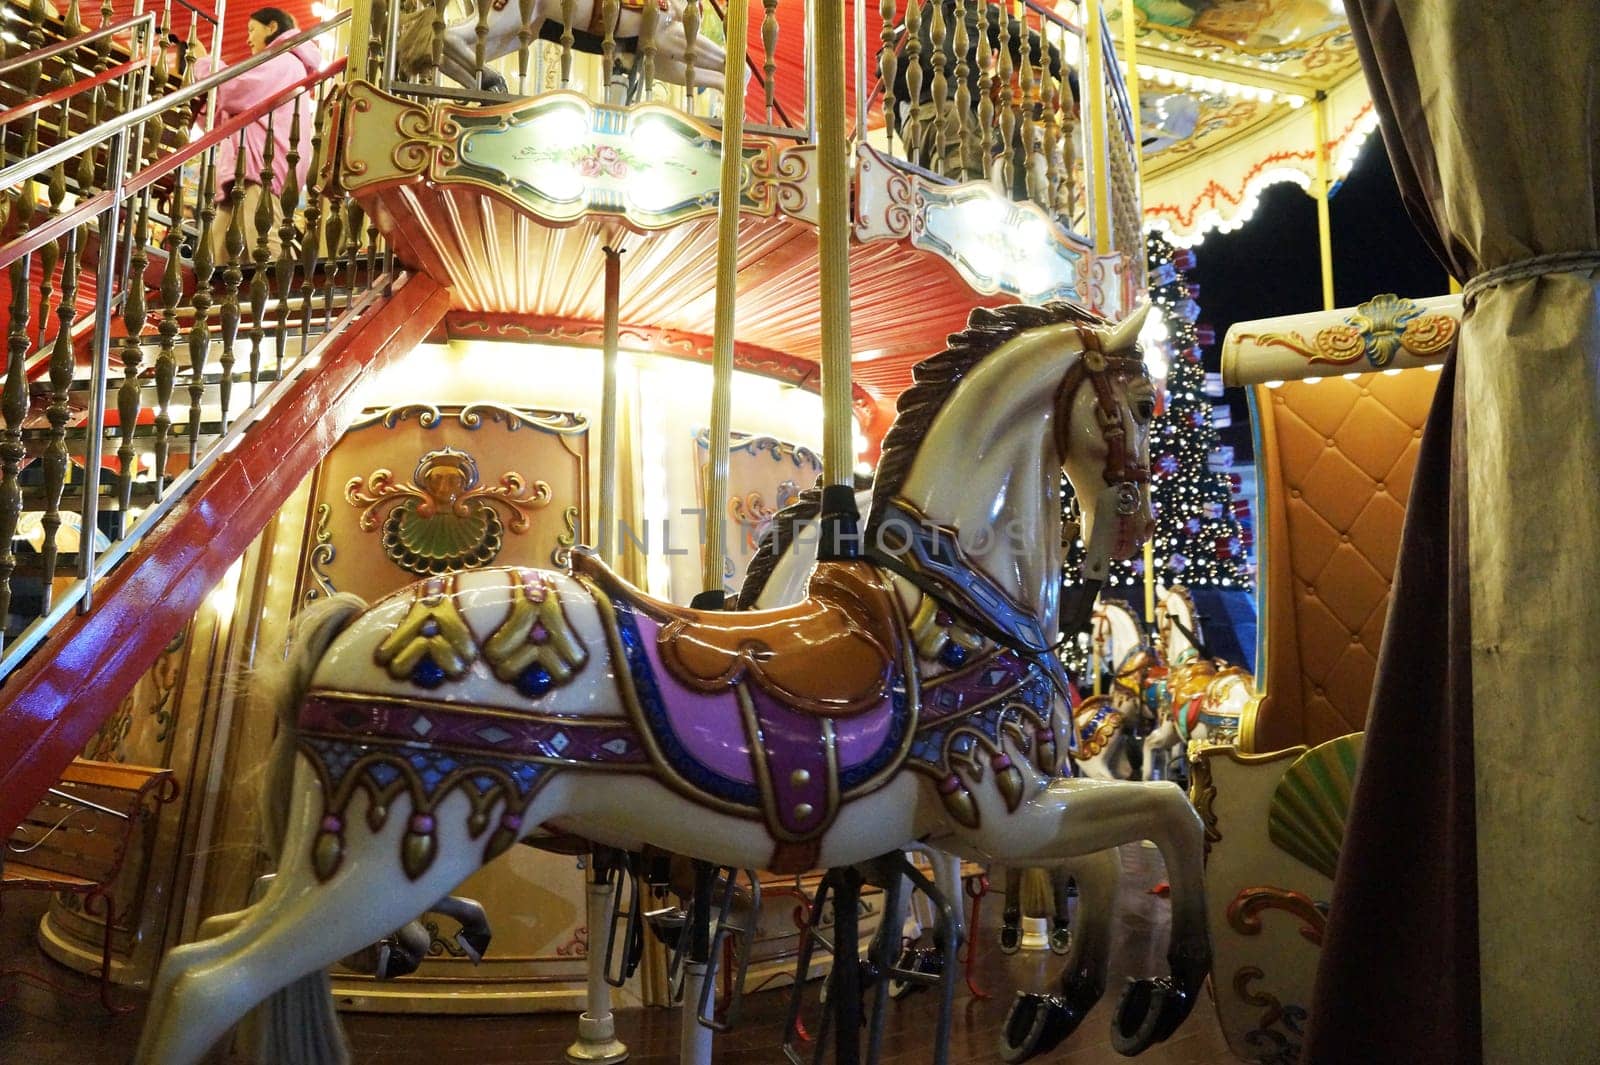 decorated white horse on a lighted children's carousel by Annado